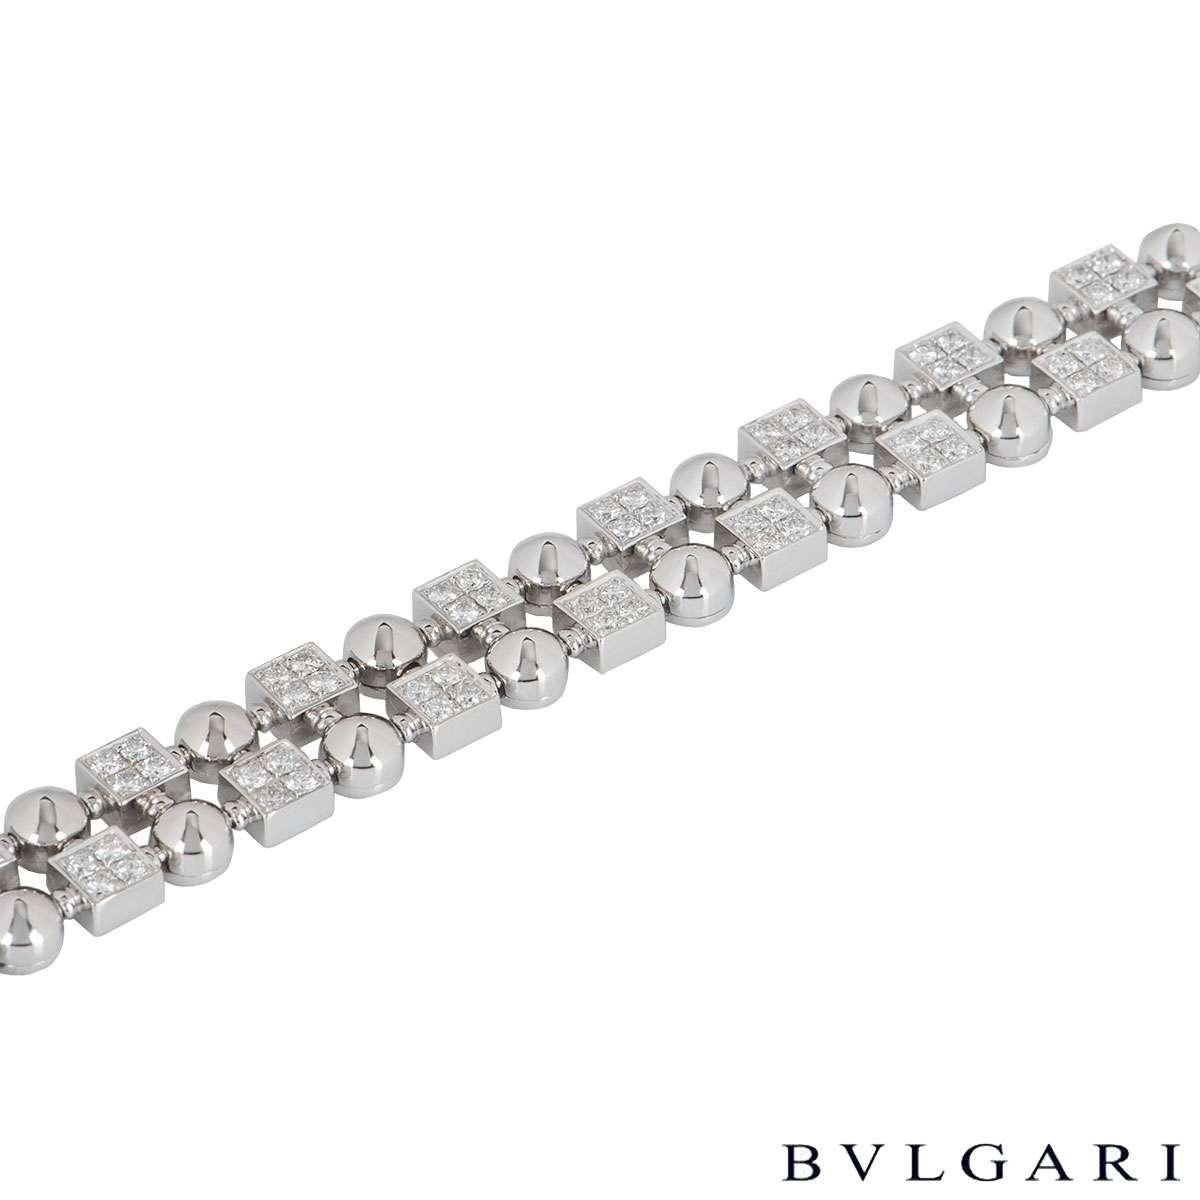 An impressive 18k white gold diamond bracelet from the Lucea collection by Bvlgari. The bracelet is composed of 32 square links, each set with four round brilliant cut diamonds totalling approximately 2.56ct. Interlinking between each diamond set